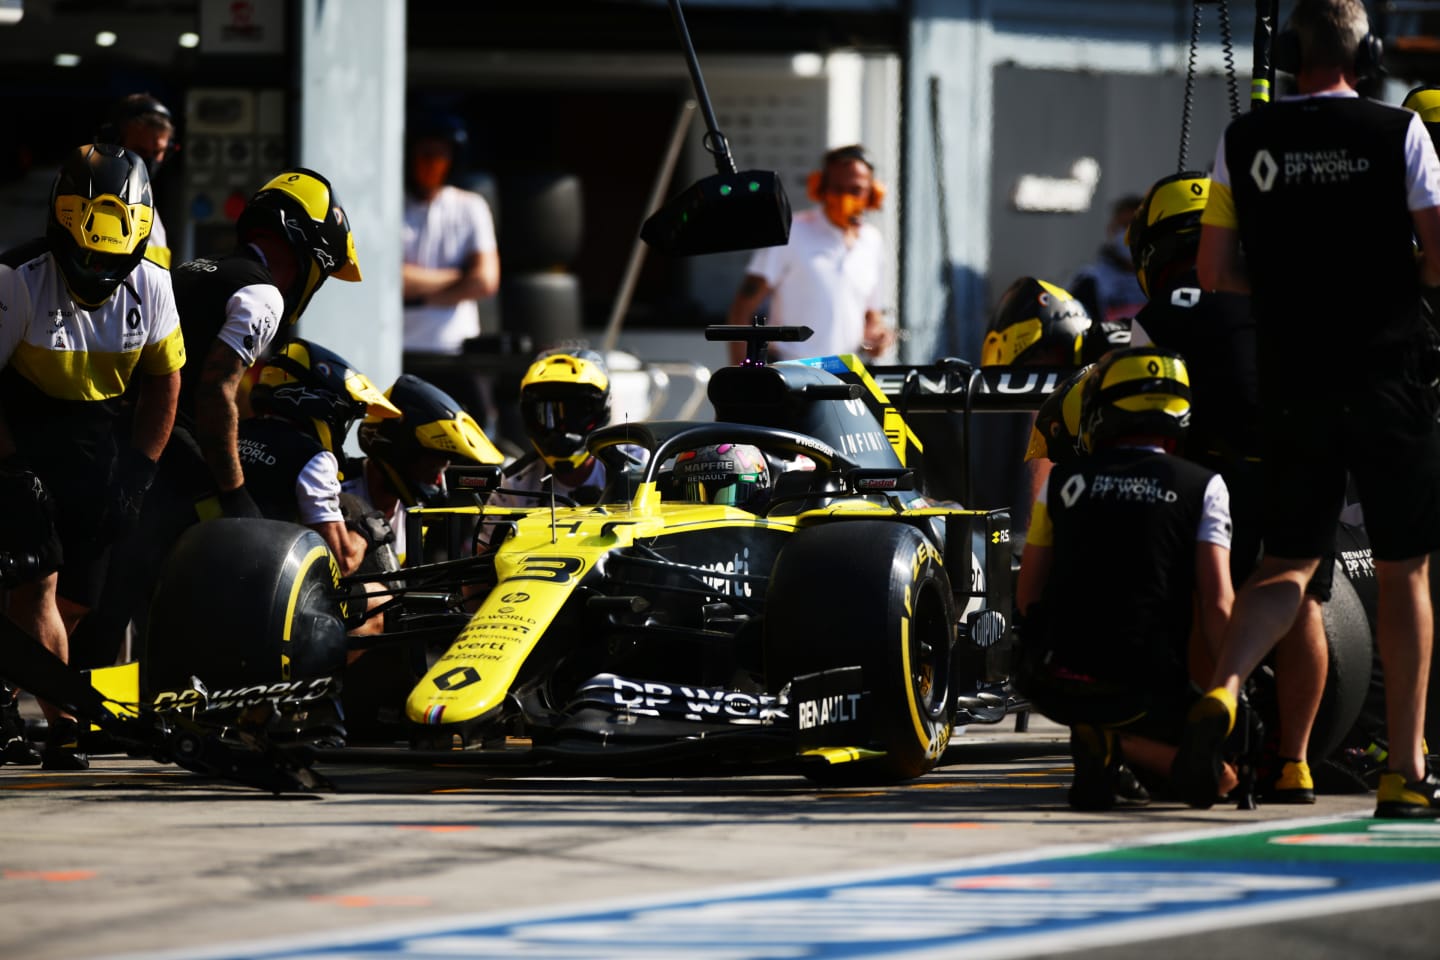 MONZA, ITALY - SEPTEMBER 04: Daniel Ricciardo of Australia driving the (3) Renault Sport Formula One Team RS20 stops in the Pitlane during practice for the F1 Grand Prix of Italy at Autodromo di Monza on September 04, 2020 in Monza, Italy. (Photo by Peter Fox/Getty Images)